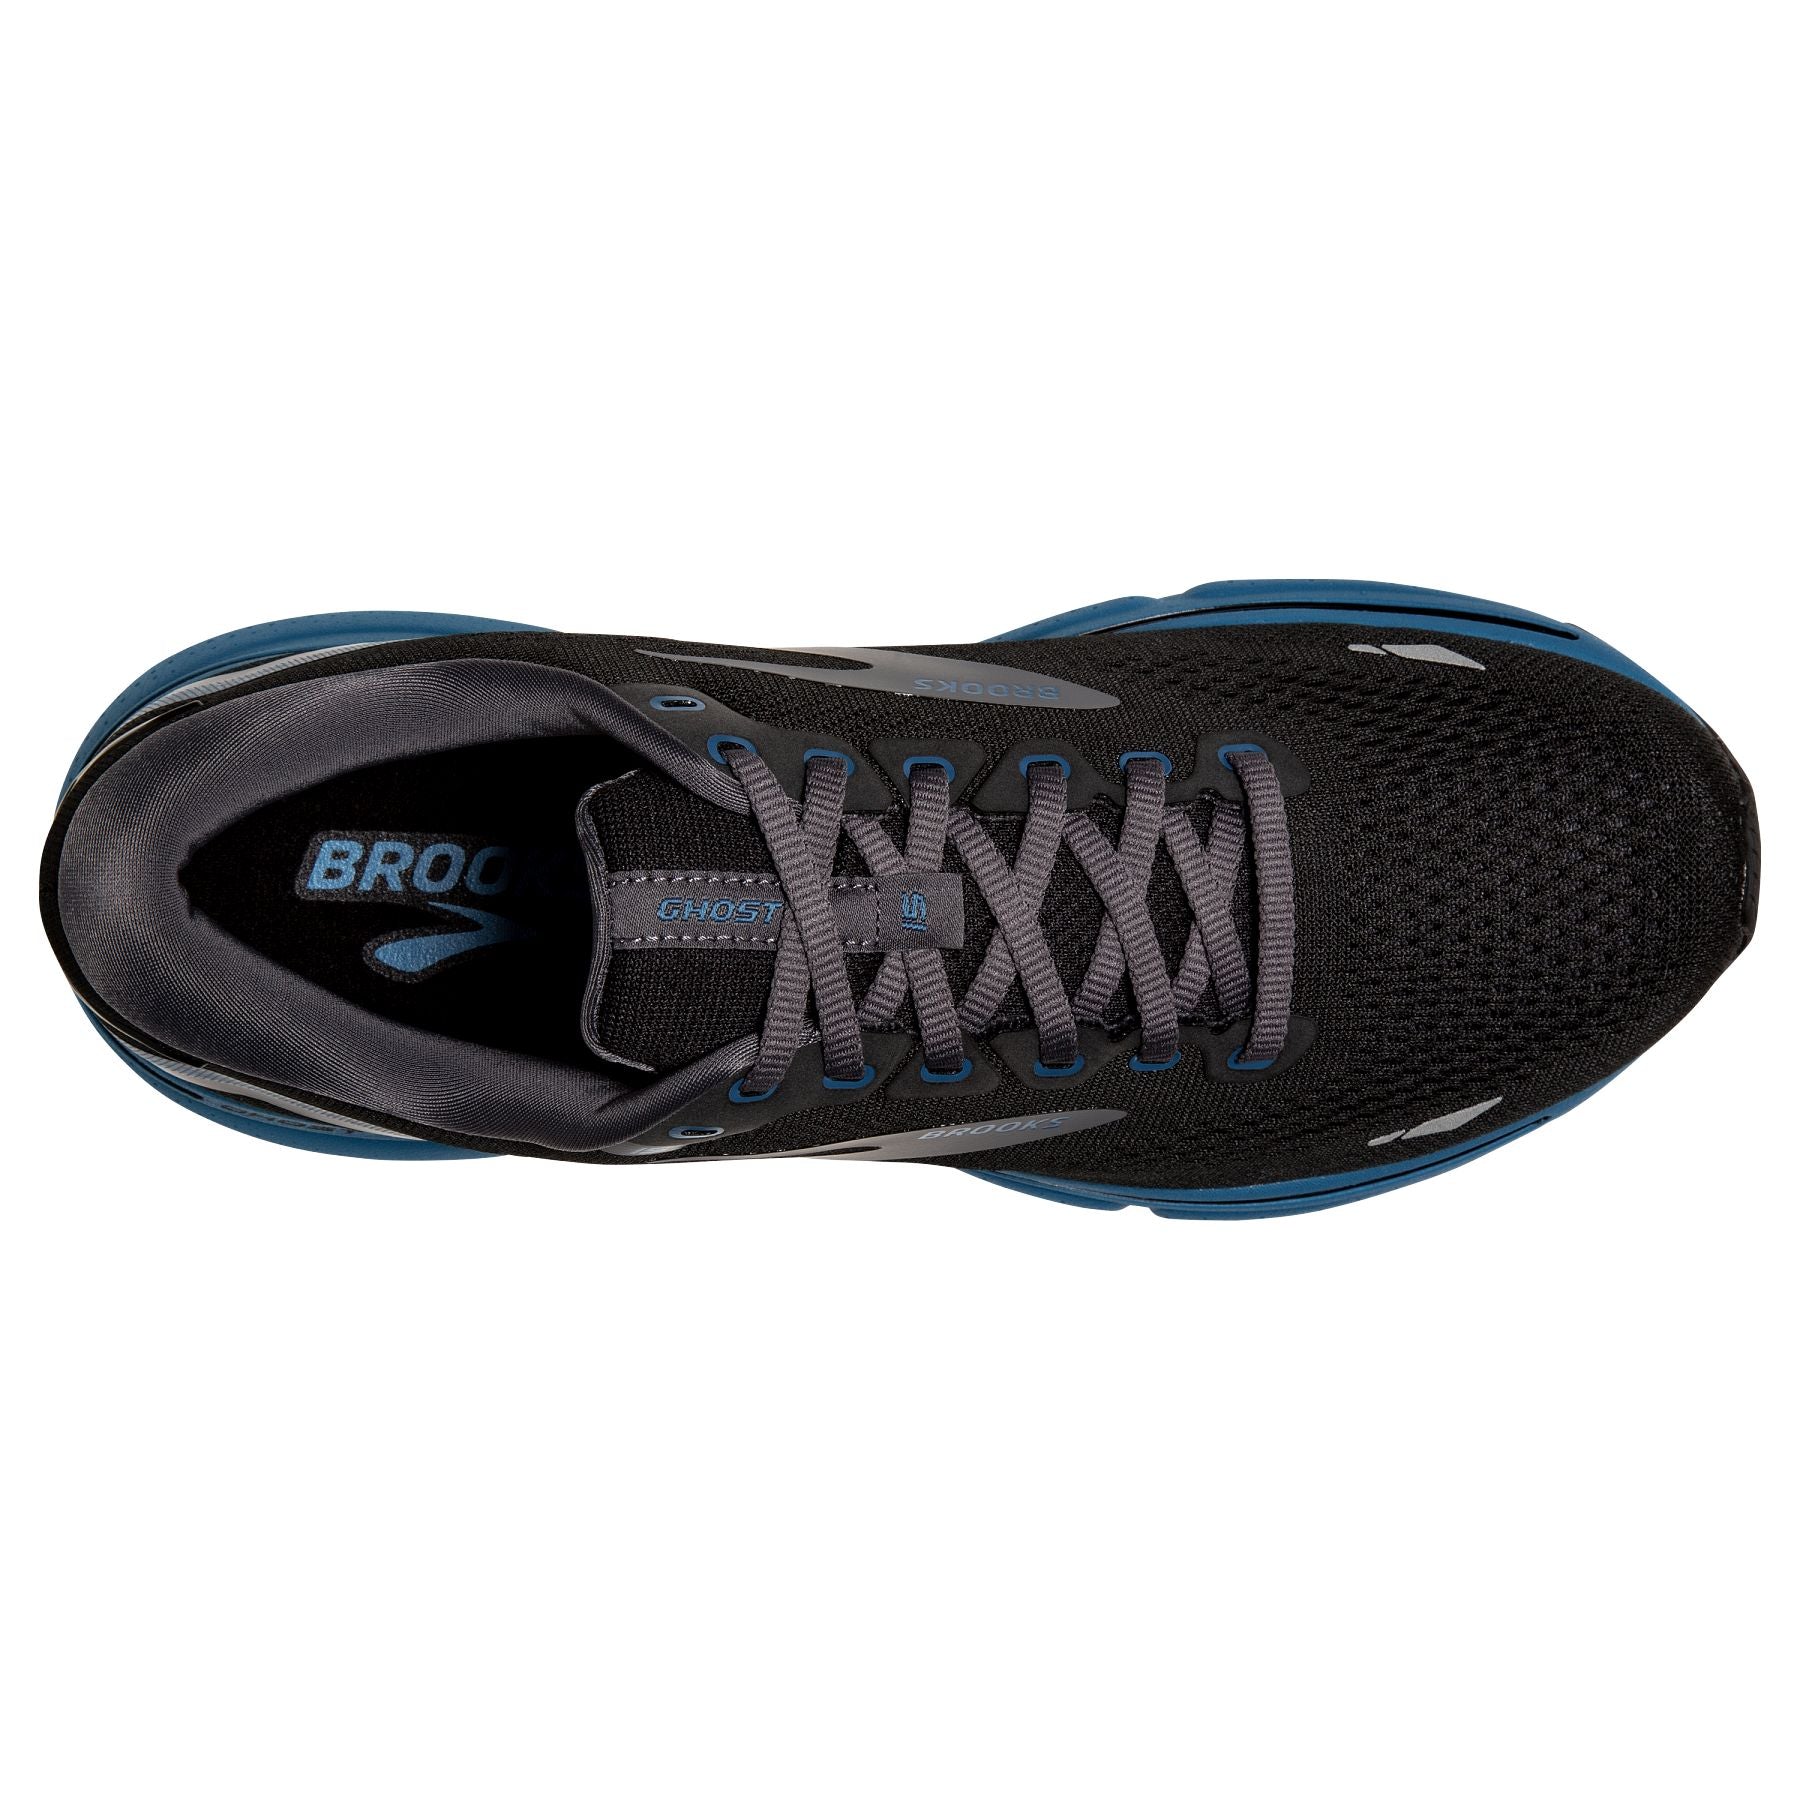 Top view of the Men's Ghost 15 by Brooks in the color Black/Blackened Pearl/Blue